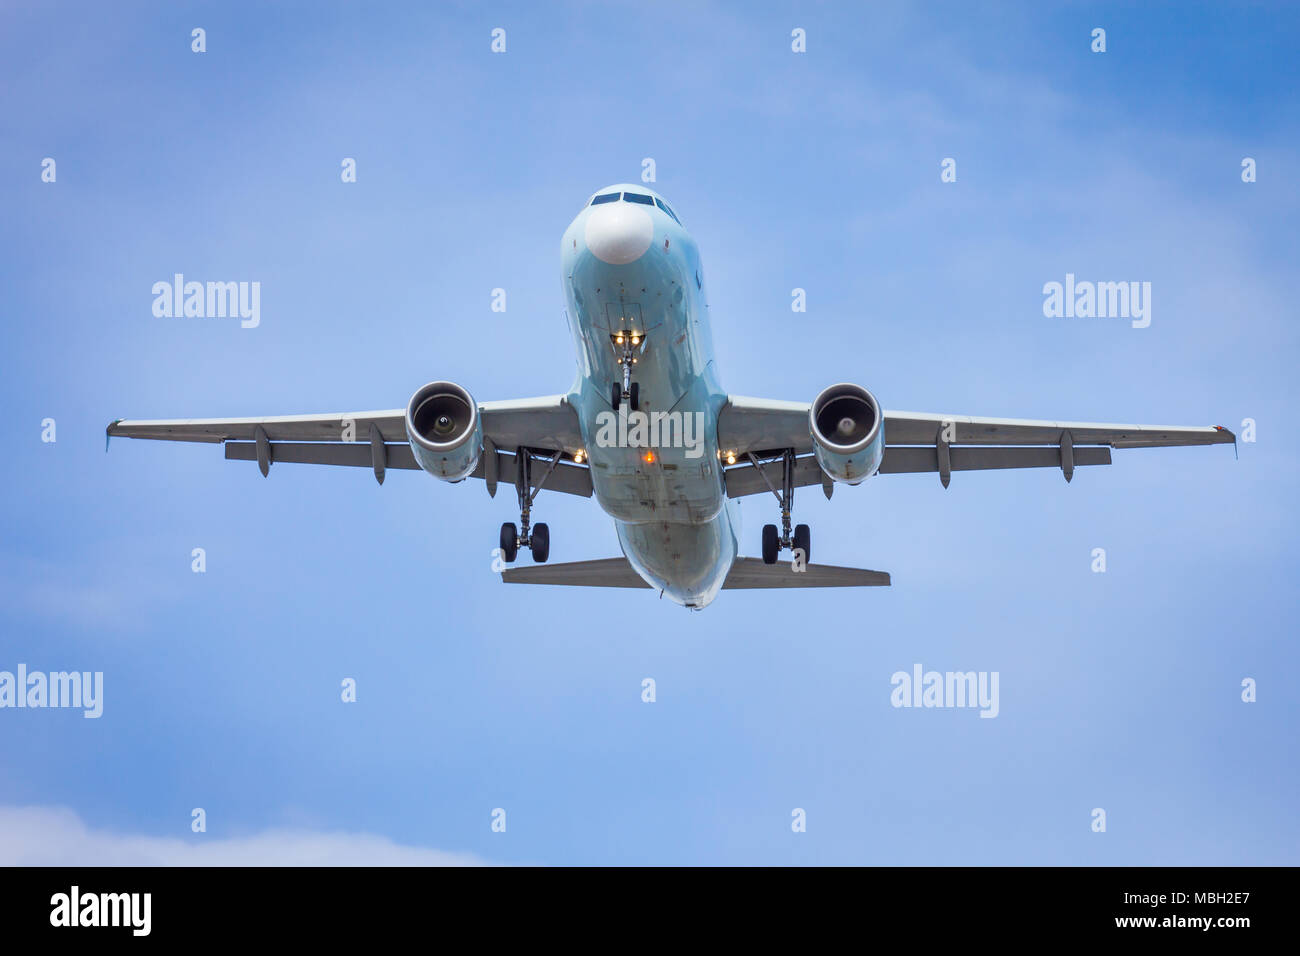 Plane about to land with a blue sky Stock Photo